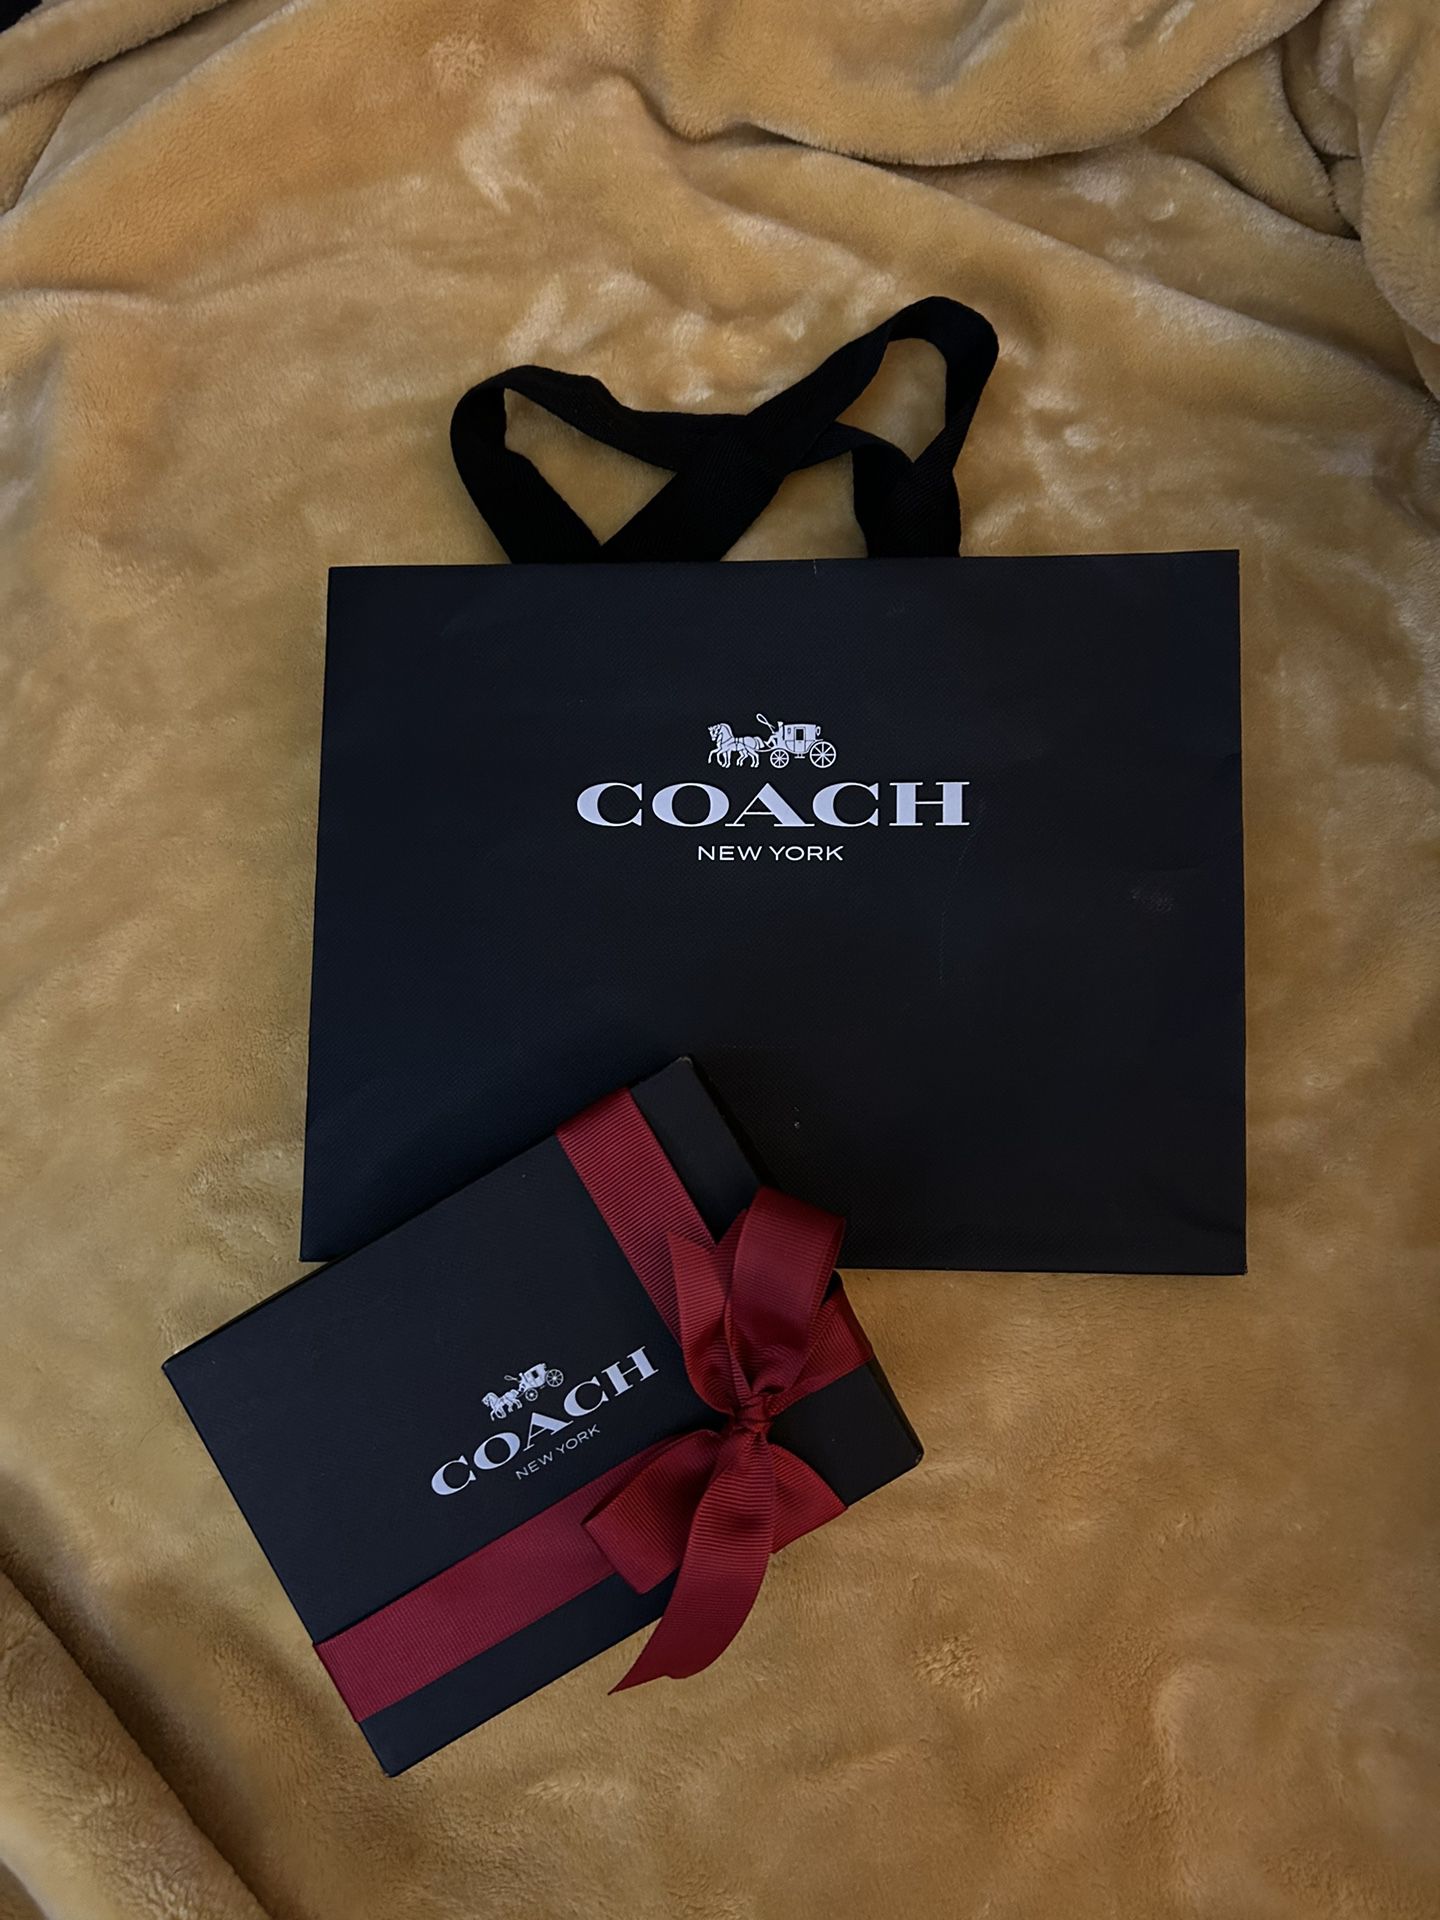 Coach Gift Bag and Coach Gift Box with Bow